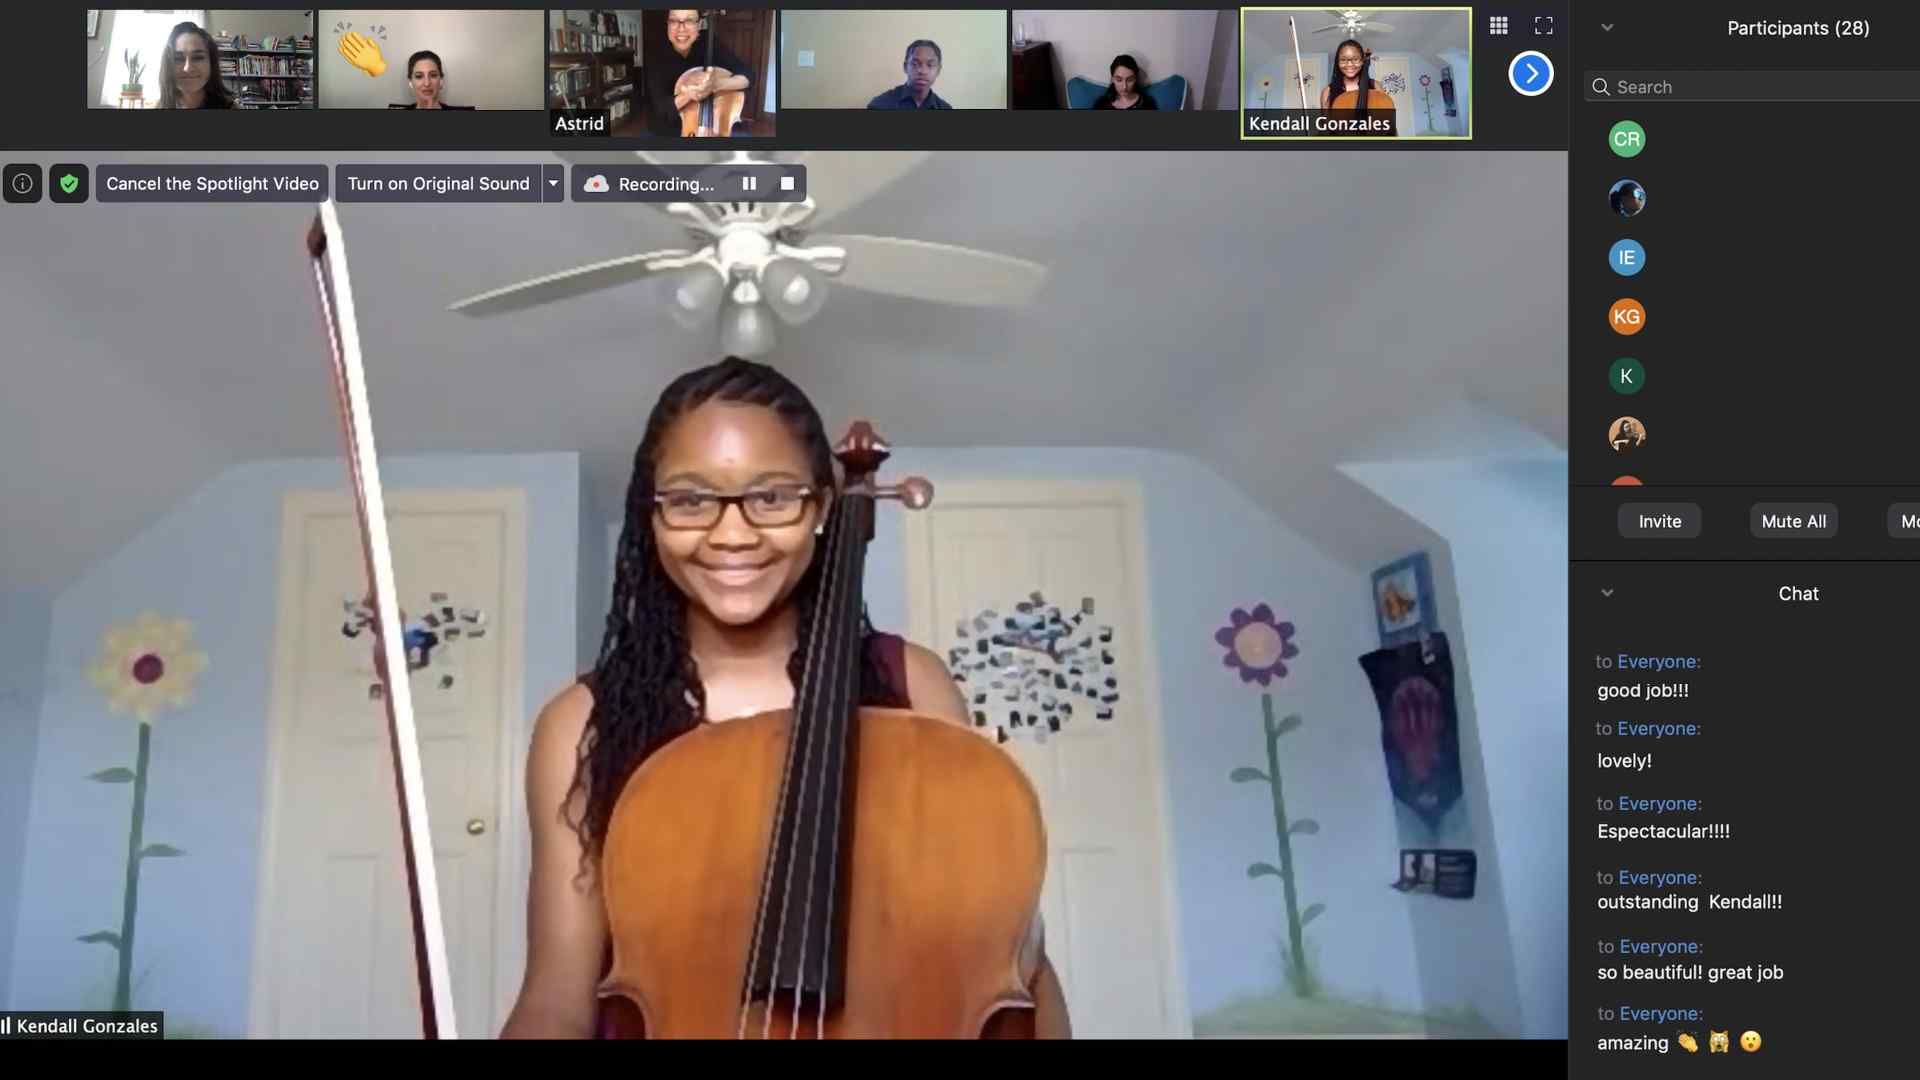 Kendall Gonzales, cellist, a participant in the Sphinx Performance Academy, on Zoom; the Zoom screen shows the other participants and the group's text chat box